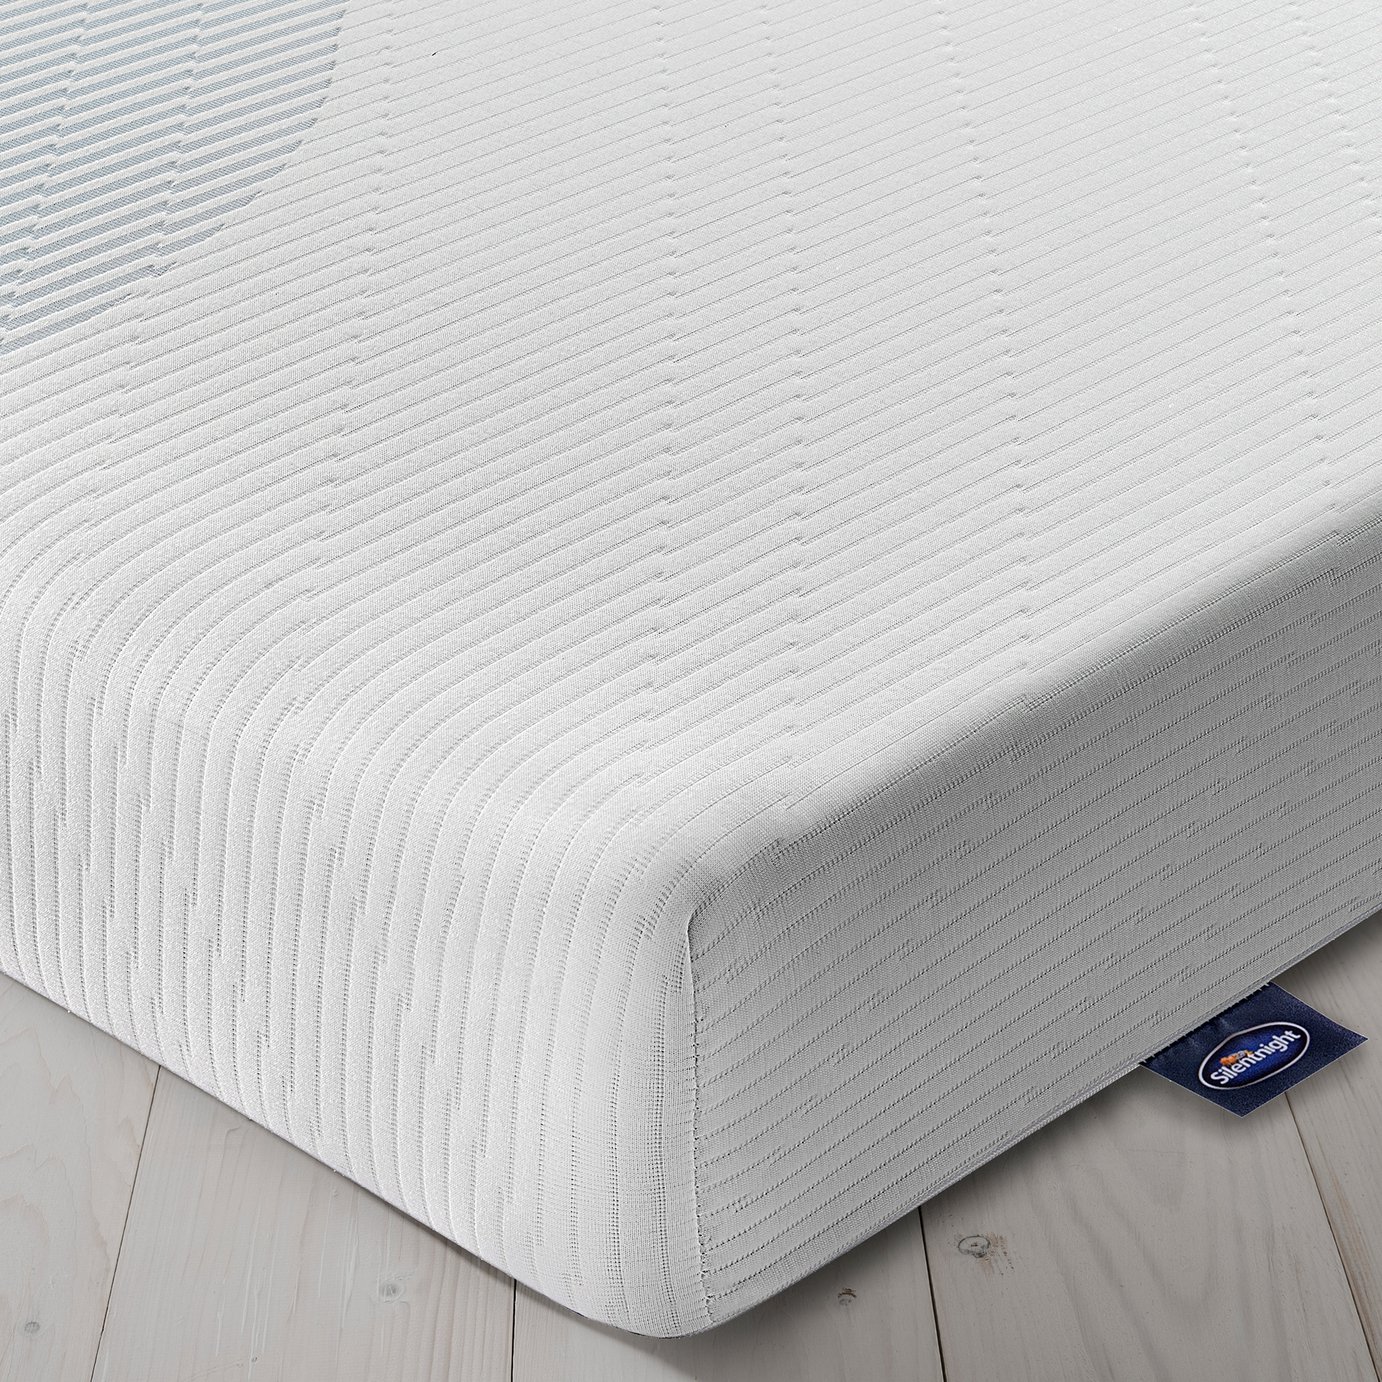 Small Double /& Double Memory Foam Sprung Mattress Starlight Beds Small Double Mattress 4ft Small Double Memory Foam Mattress